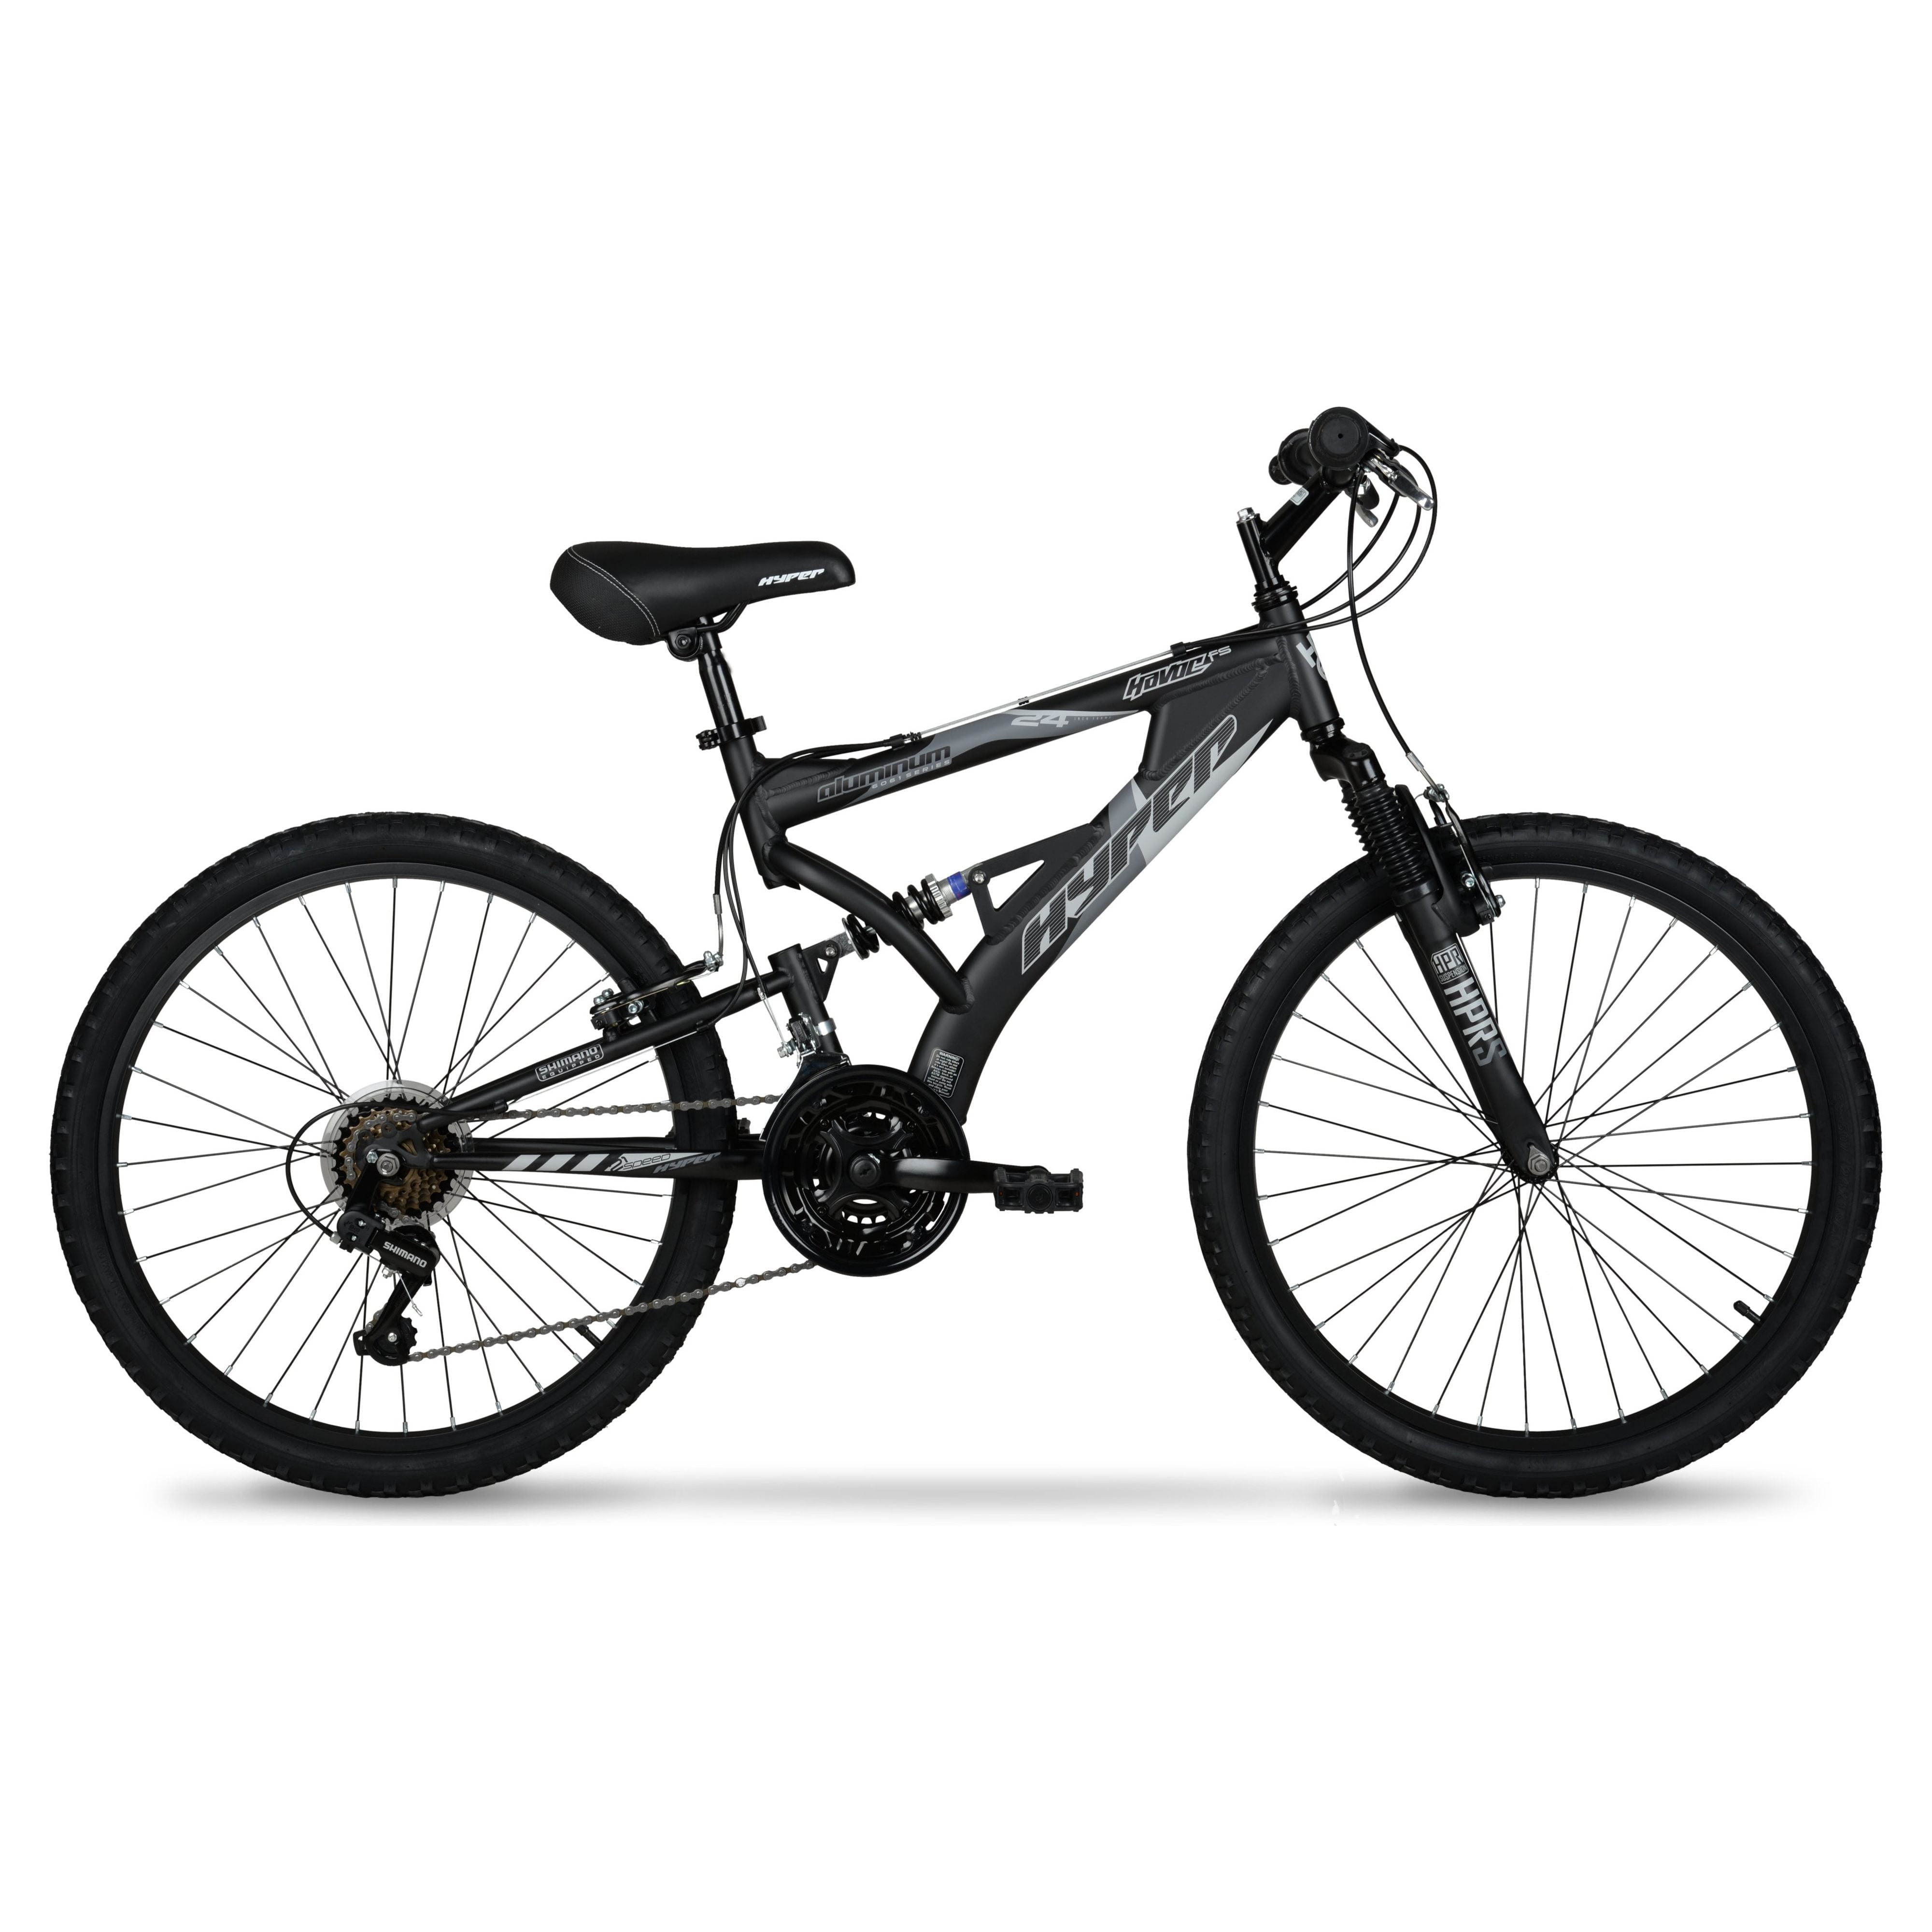 Hyper 24 Boy's Havoc Mountain Bike, Black, Recommended Ages 10 to 14 Years  Old 